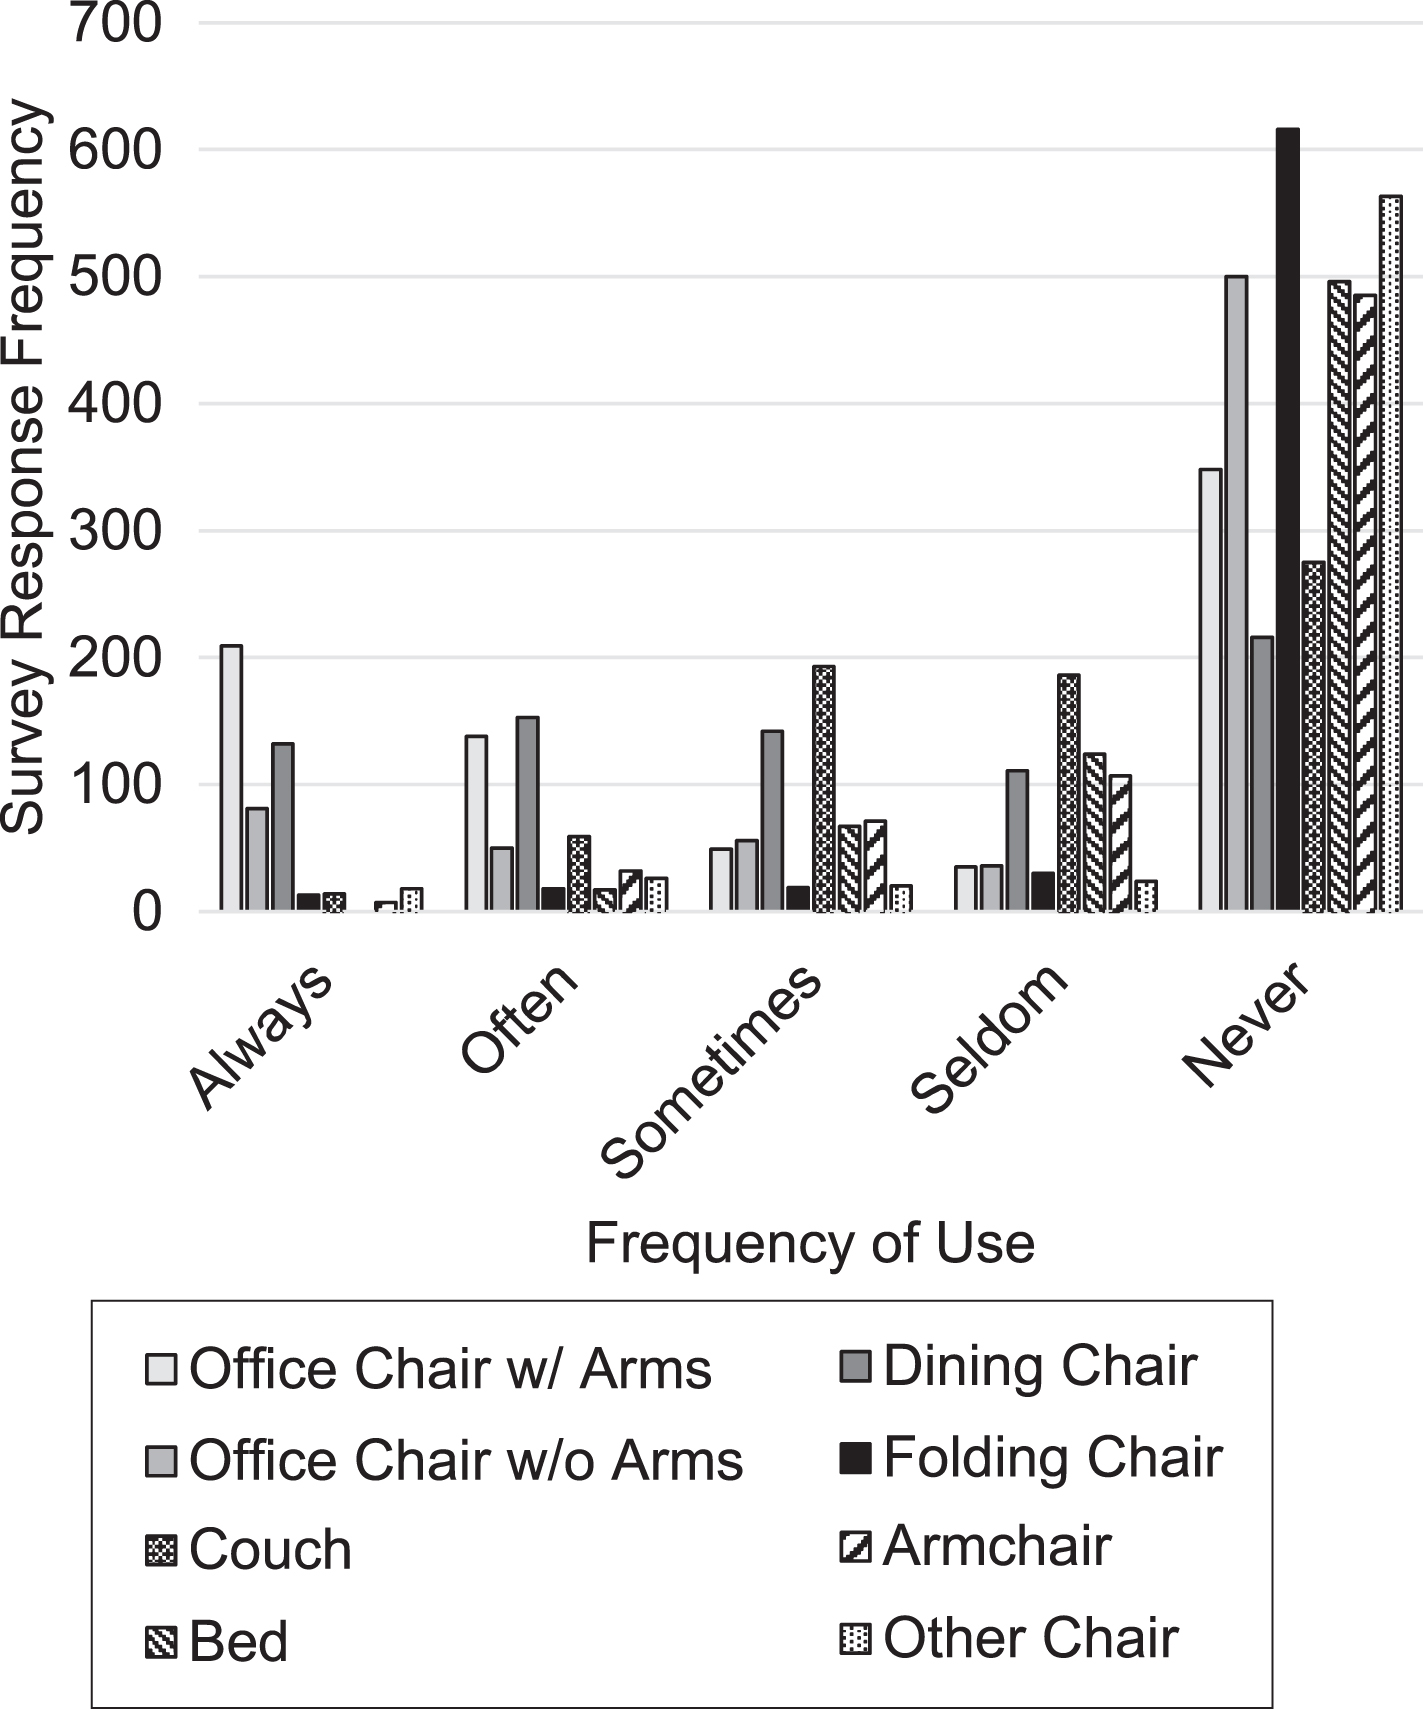 Frequency of use for each chair type.